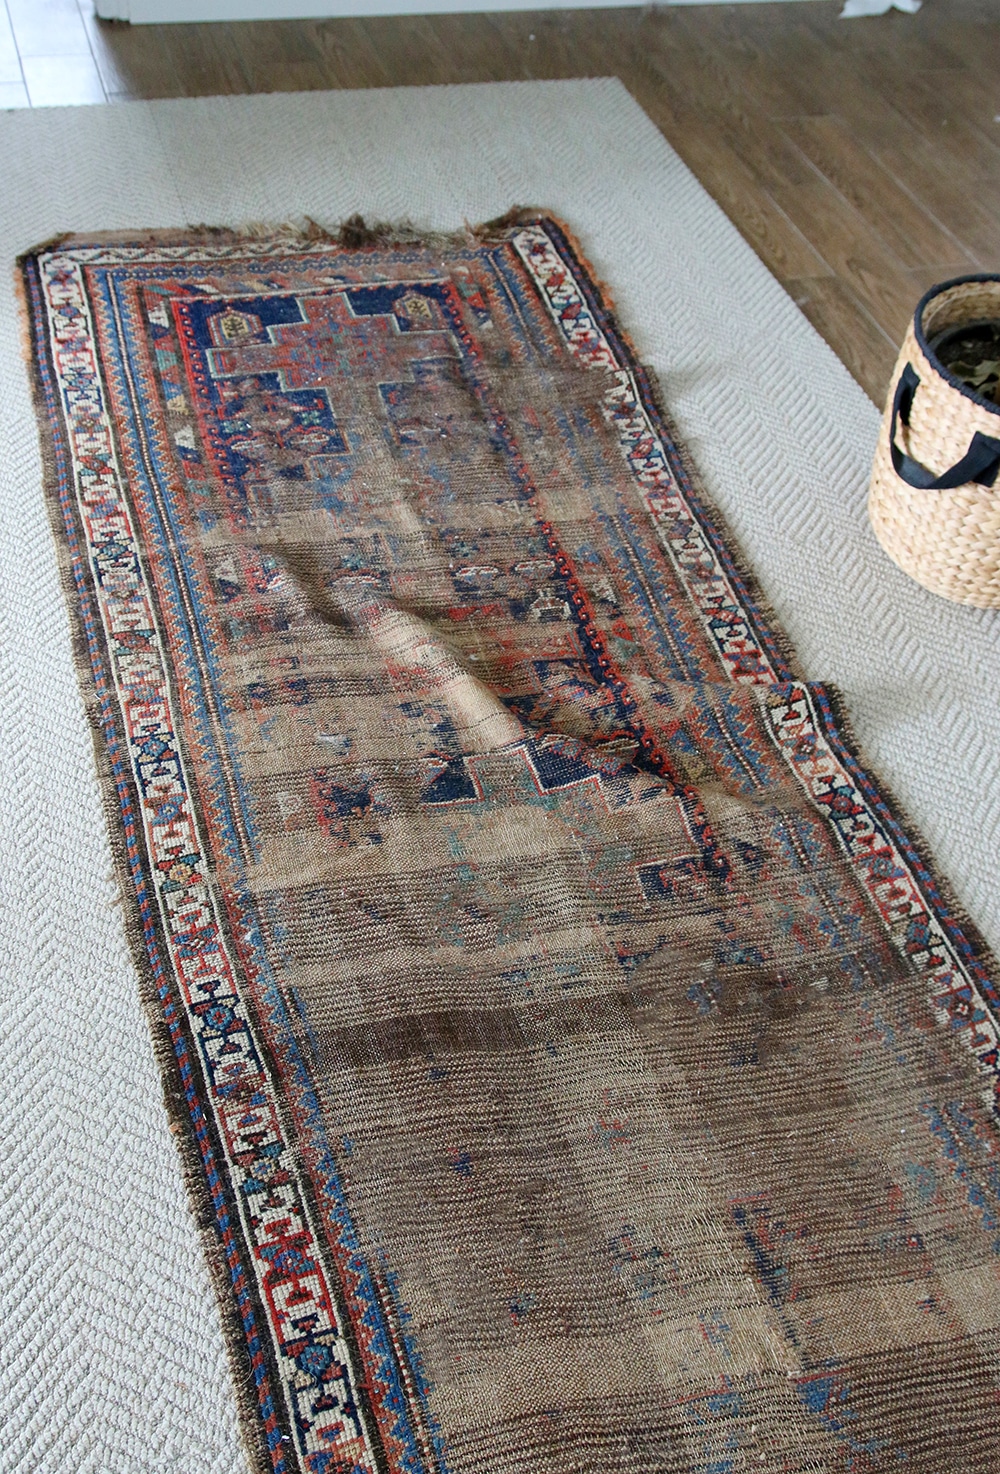 5 Tips For Keeping Area Rugs Exactly, How To Keep Rugs From Slipping On Hardwood Floors